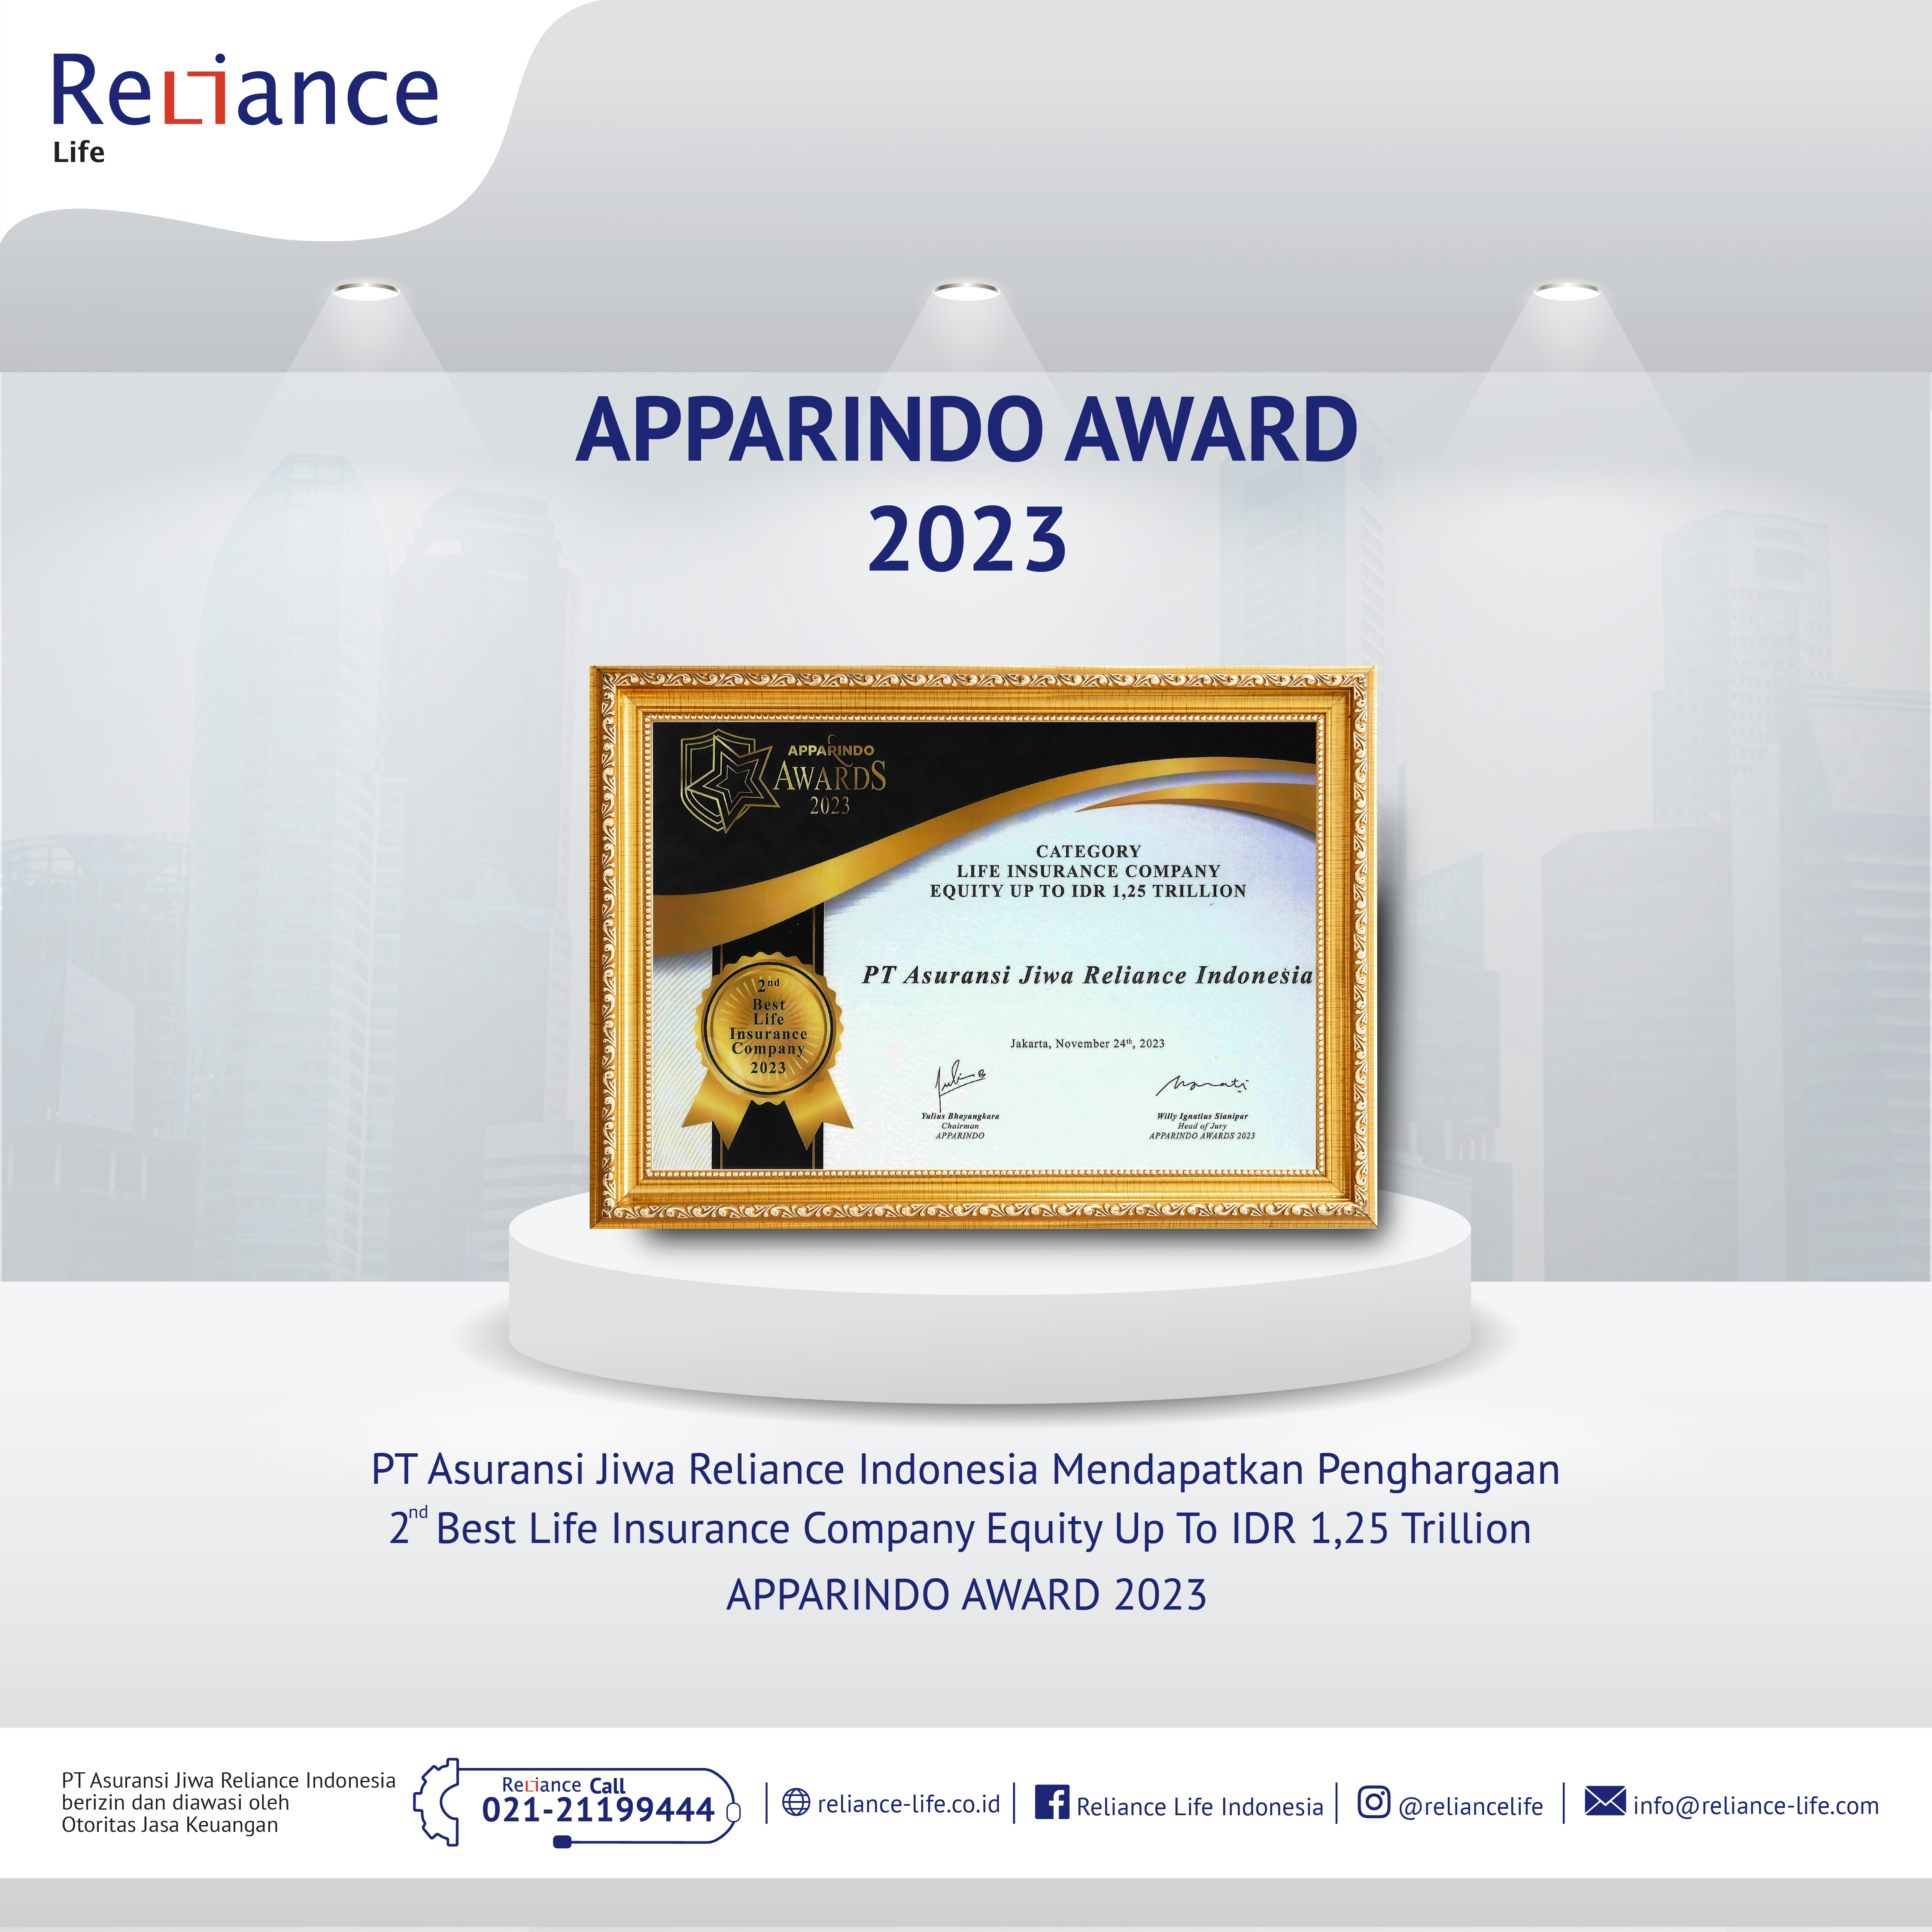 PT Asuransi Jiwa Reliance Indonesia Unit  meraih penghargaan “2nd The Best Performance Life Insurance Company 2023 (Equity Up To IDR 1,25 Trillion)”